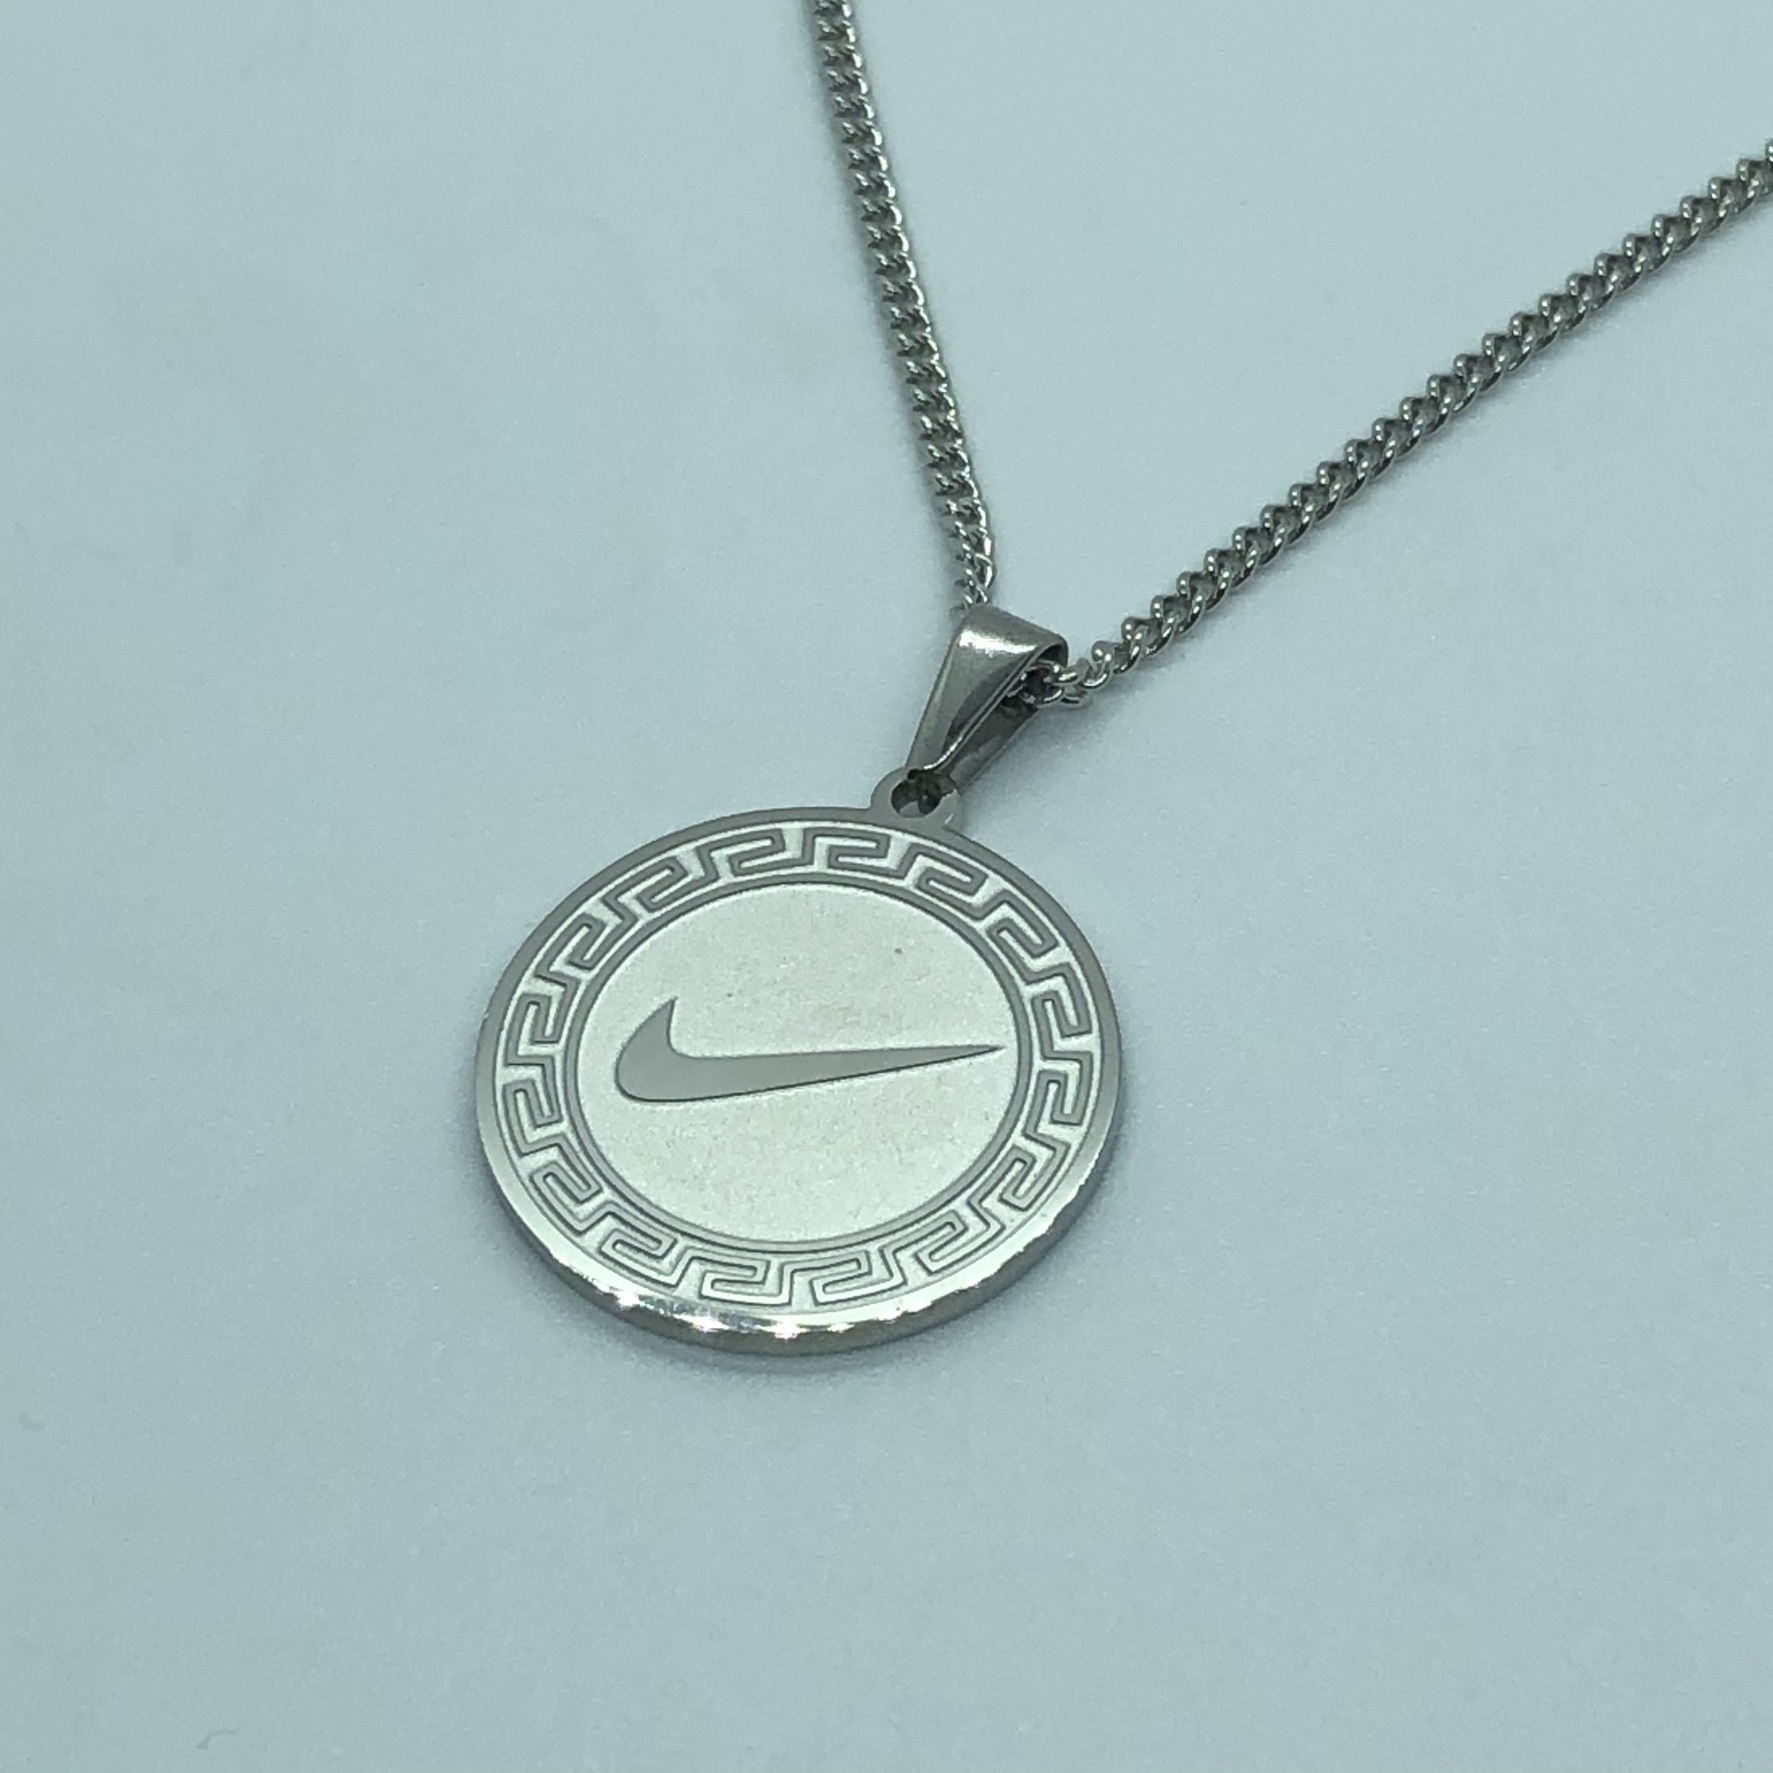 Nike Swoosh Coin Necklace - Silver - Vintage - Vintage Clothing